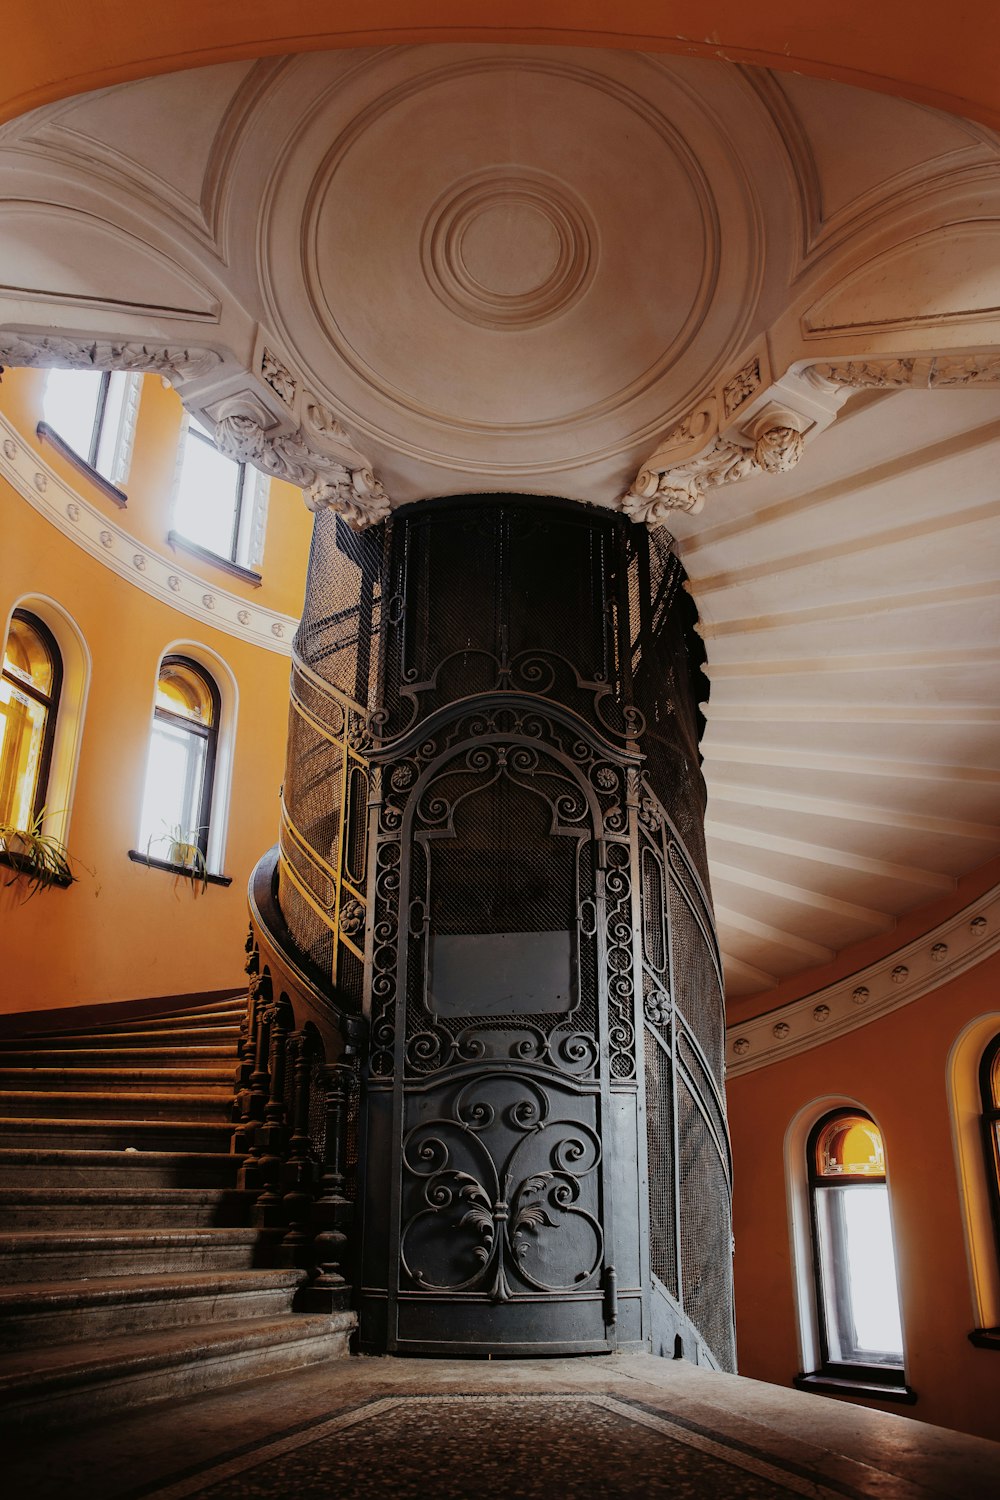 a spiral staircase in a building with a circular ceiling